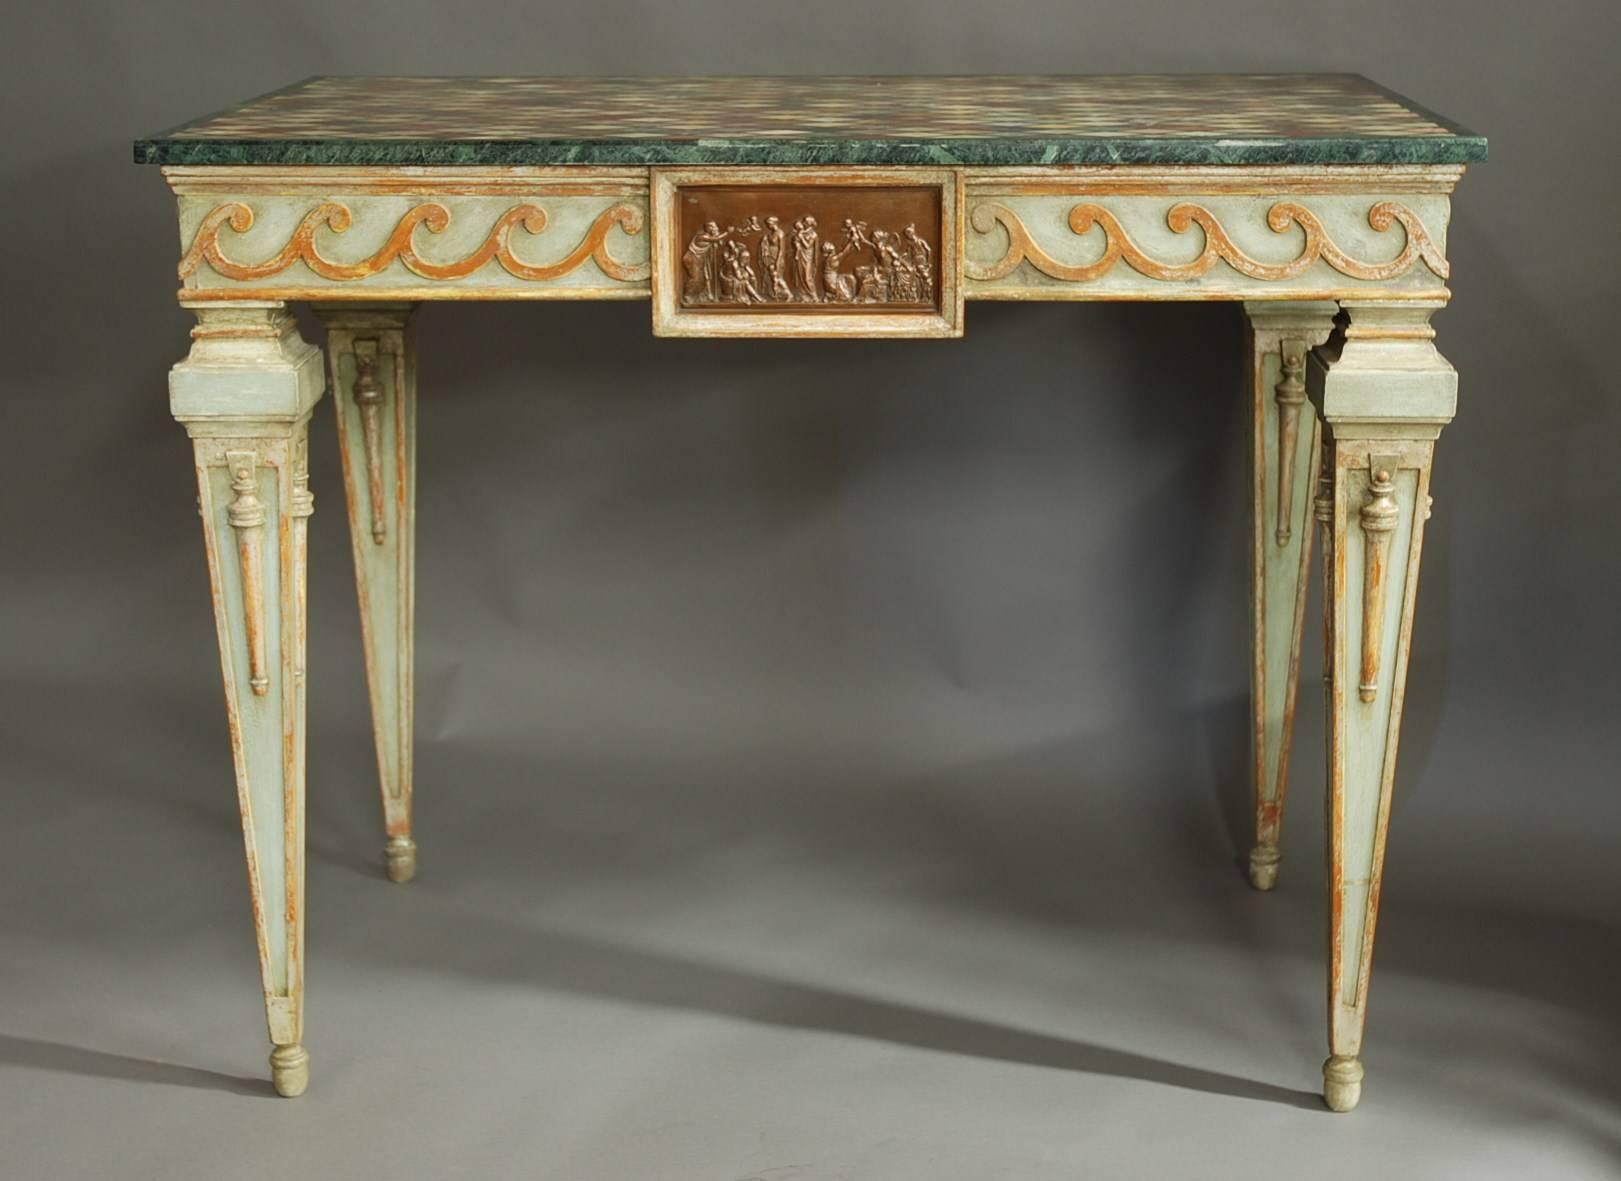 European Highly Decorative Pair of Early 20th Century Italian Painted Console Tables For Sale